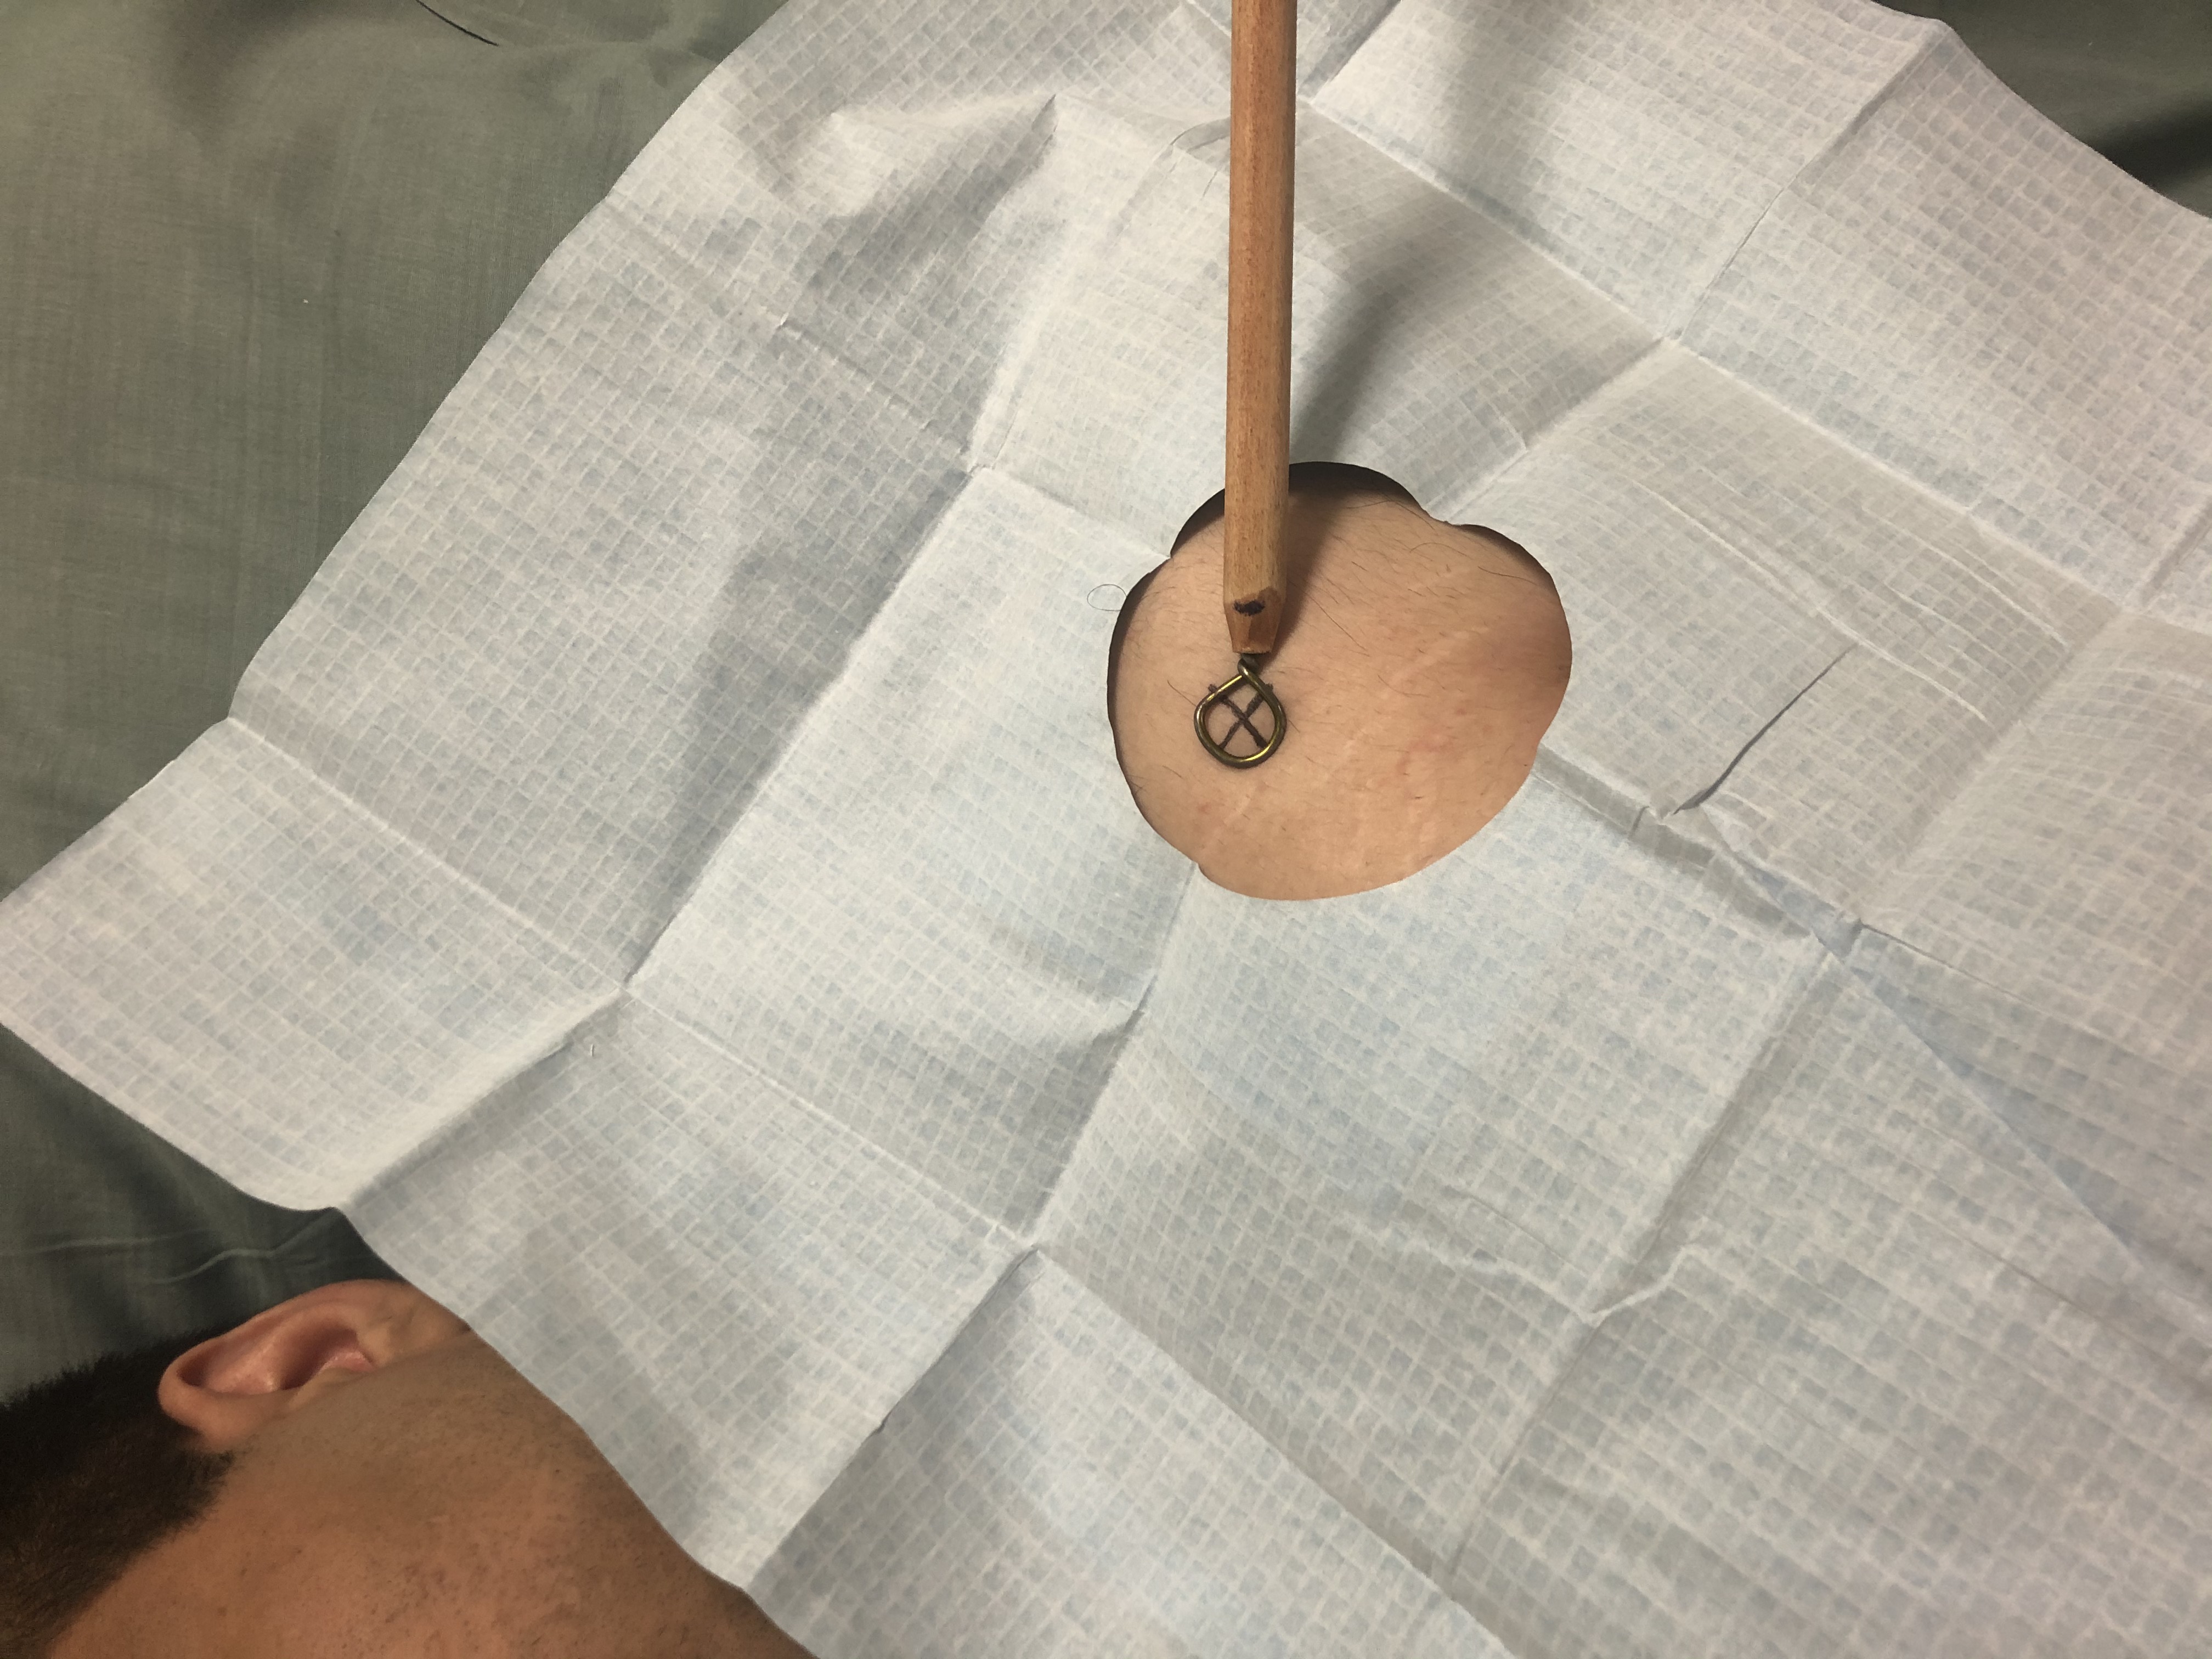 A metallic stick marker is used to assess the location of the skin immediately overlying the glenohumeral joint for a vertical/perpendicular needle approach for injection